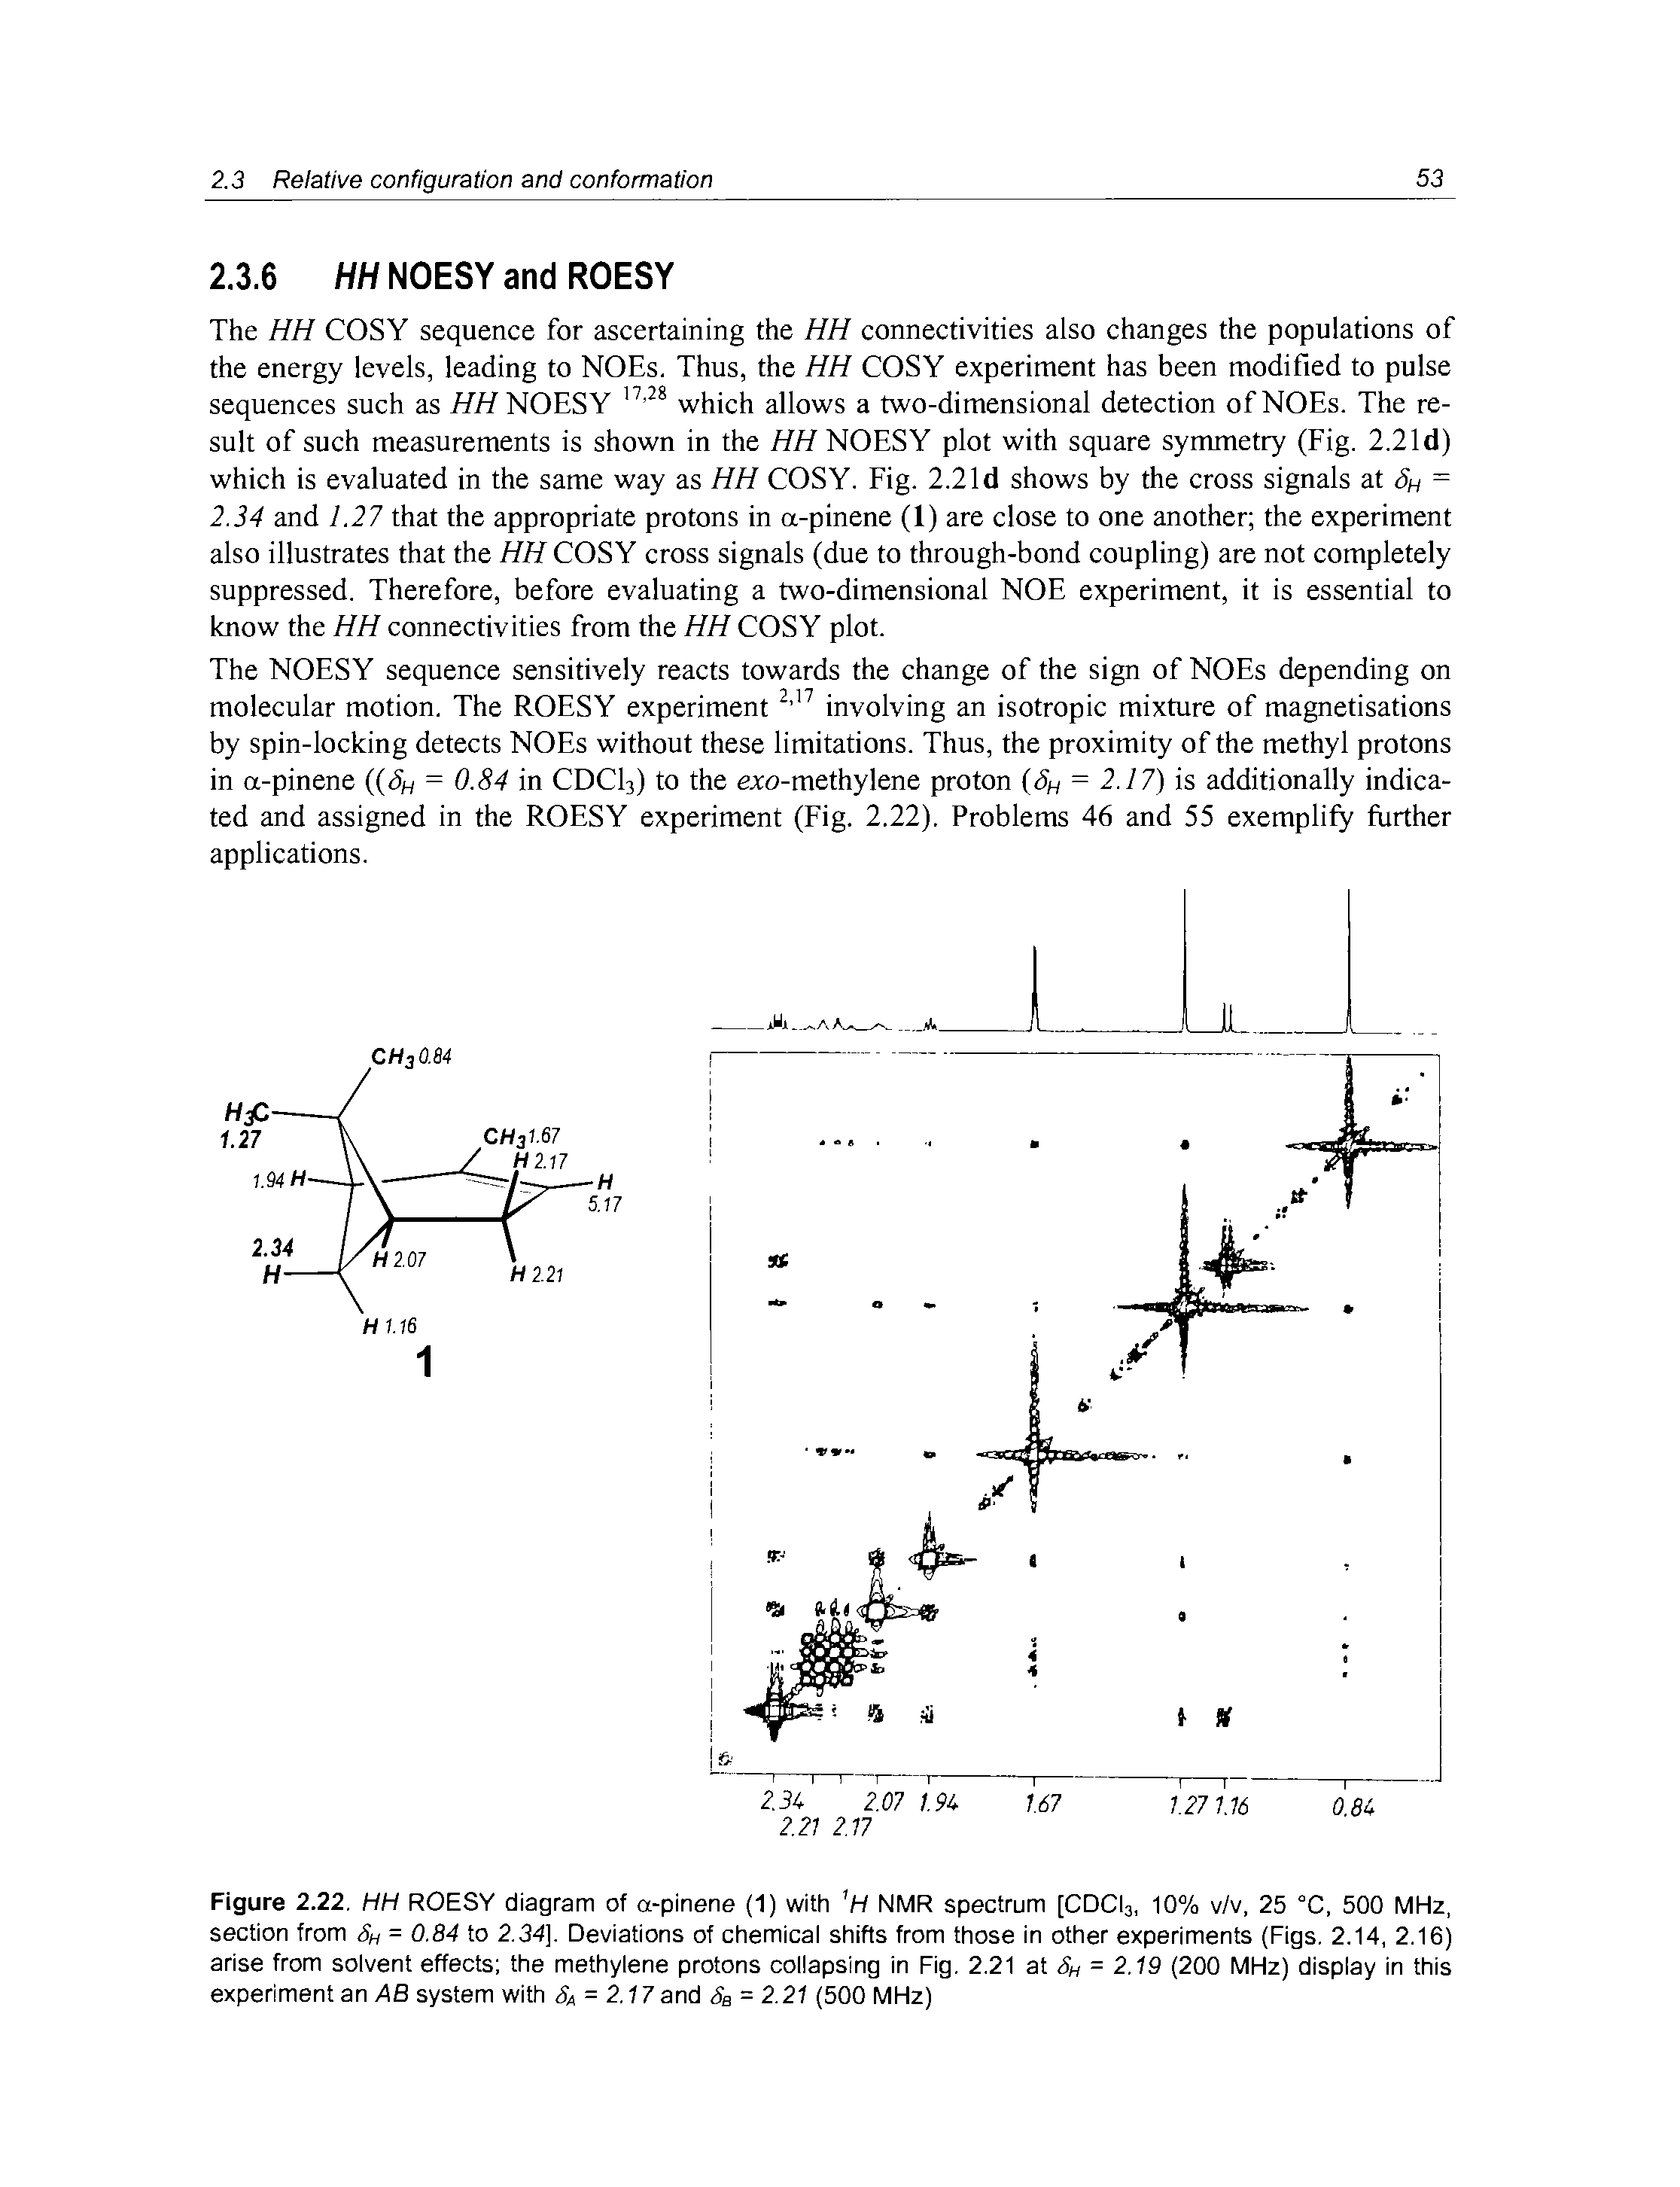 Figure 2.22, HH ROESY diagram of a-pinene (1) with H NMR spectrum [CDCI3, 10% v/v, 25 °C, 500 MHz, section from Sh = 0.84 to 2.34]. Deviations of chemical shifts from those in other experiments (Figs, 2.14, 2.16) arise from solvent effects the methylene protons collapsing in Fig, 2.21 at Sh = 2.19 (200 MHz) display in this experiment an AB system with Sa = 2,17 and Sb = 2.21 (500 MHz)...